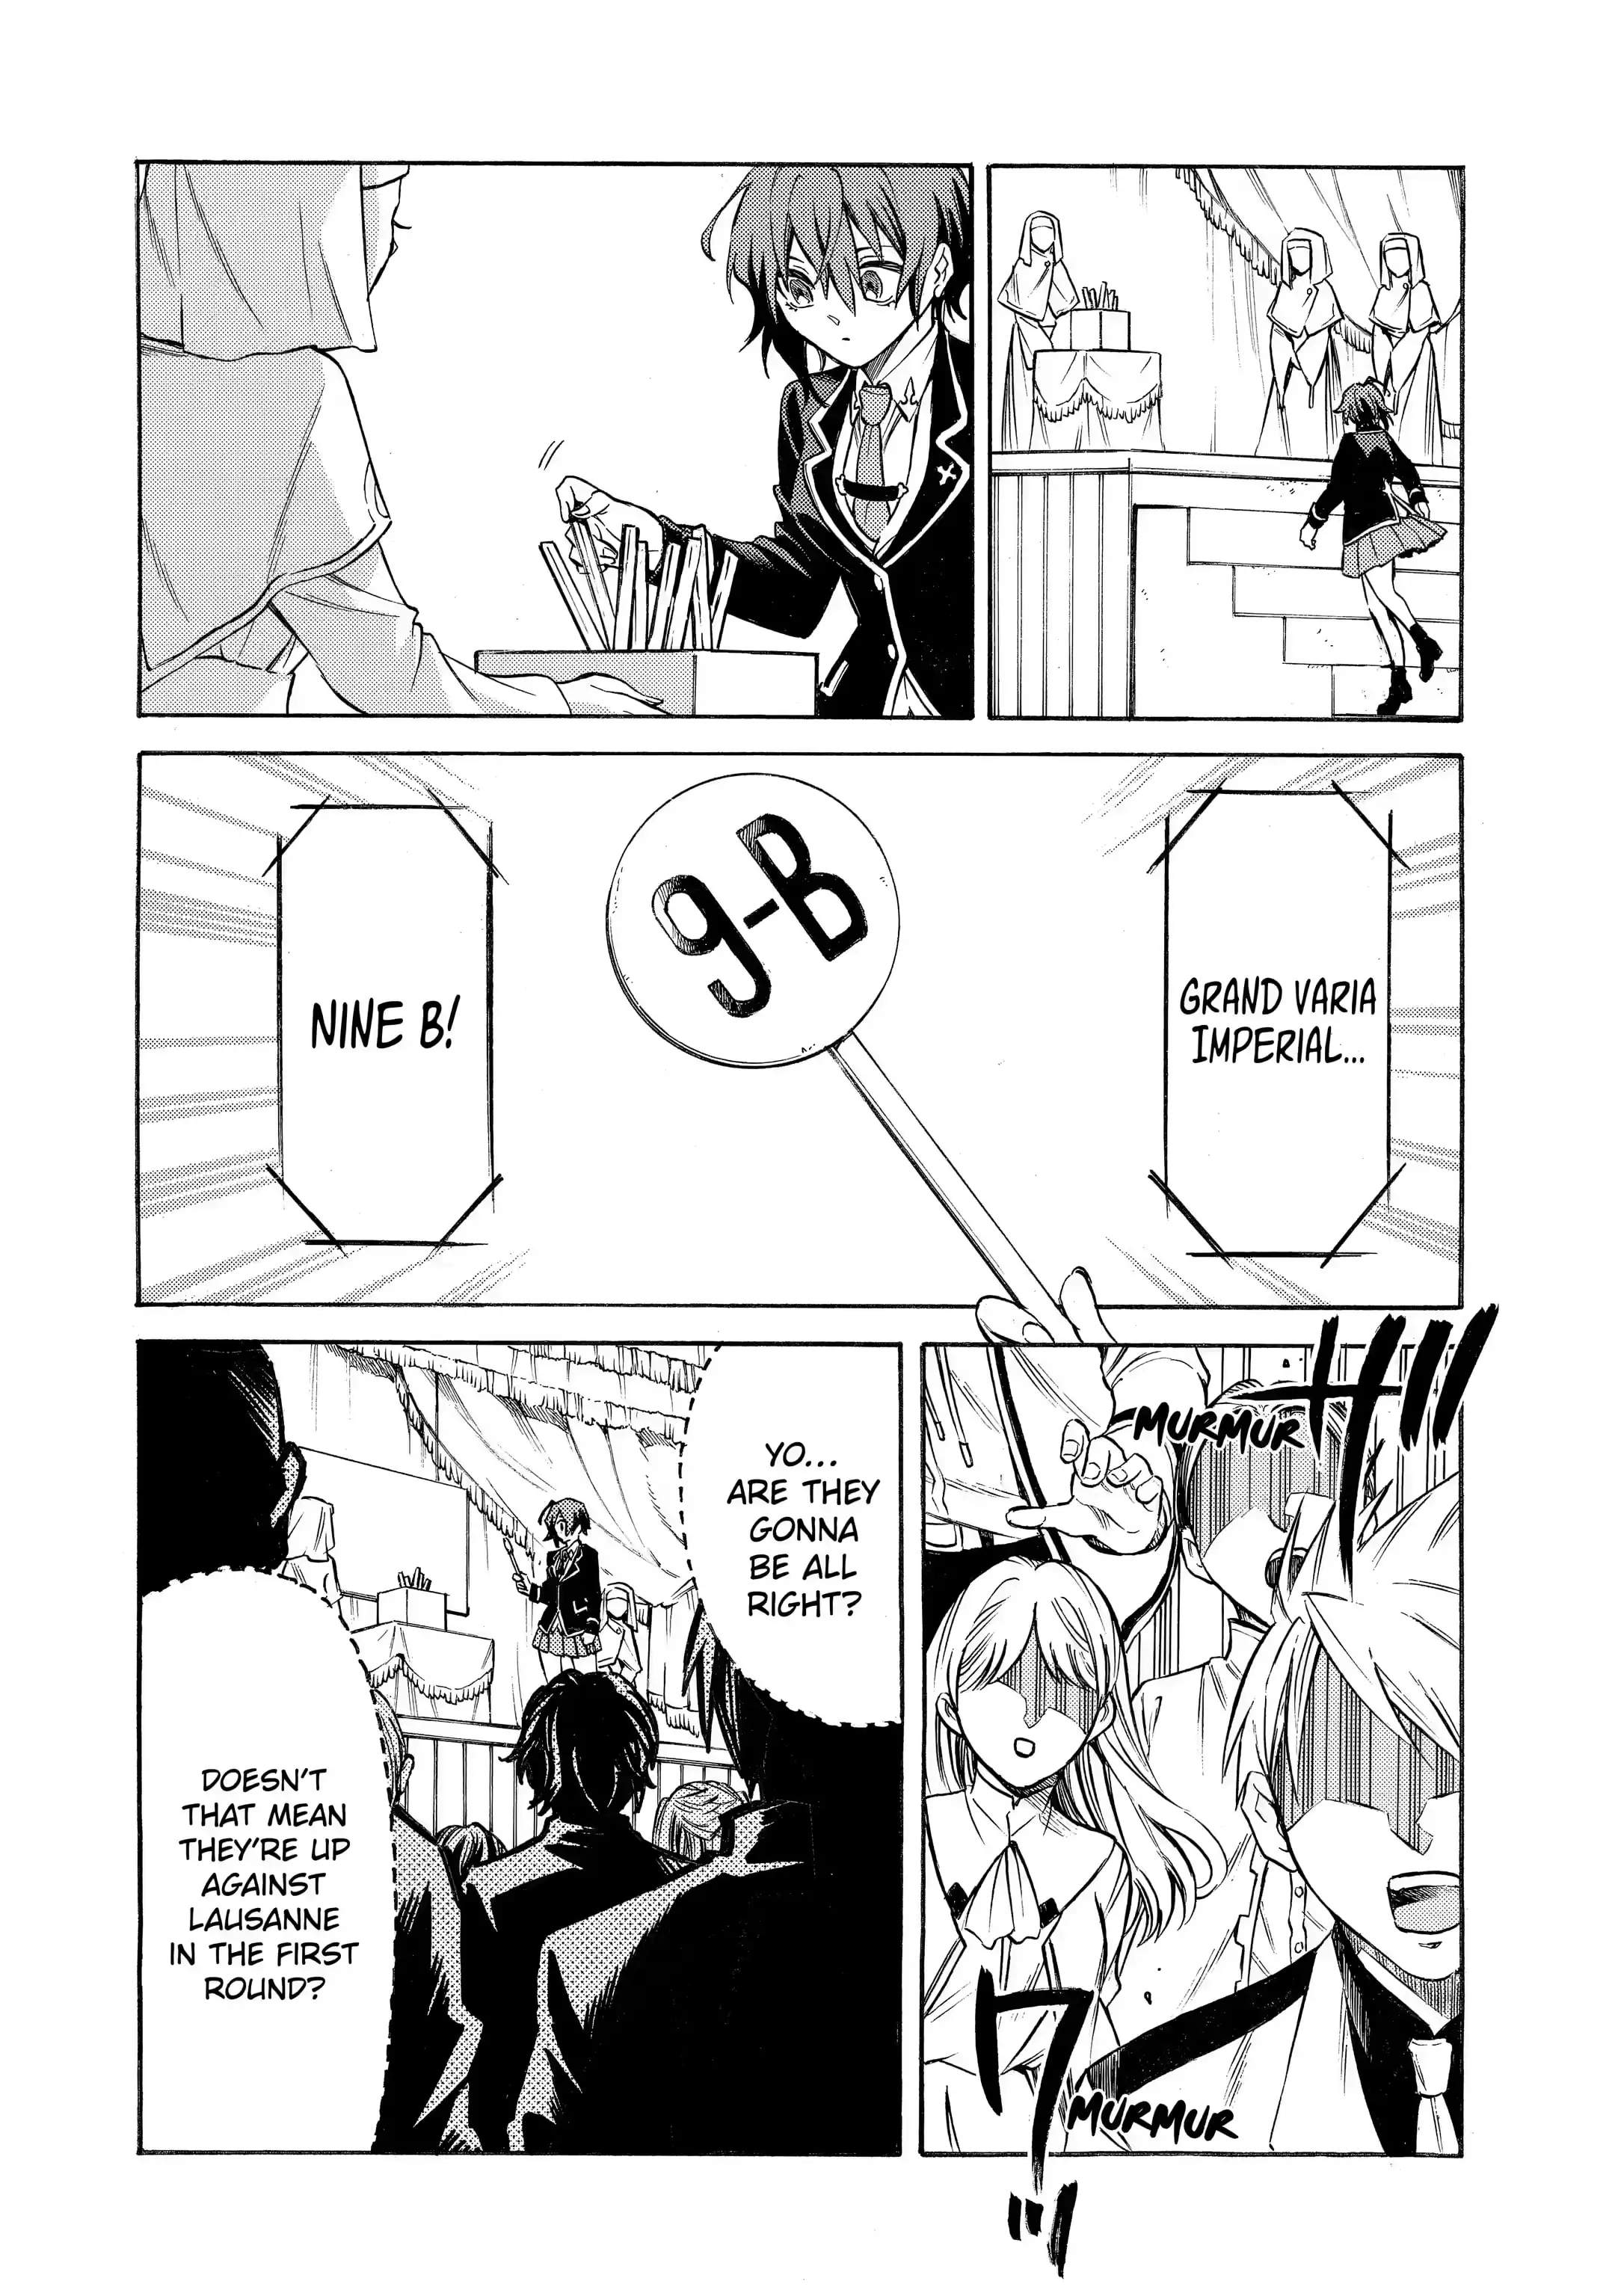 Reincarnation of the Unrivalled Time Mage: The Underachiever at the Magic Academy Turns Out to Be the Strongest Mage Who Controls Time! Chapter 13.1-eng-li - Page 8